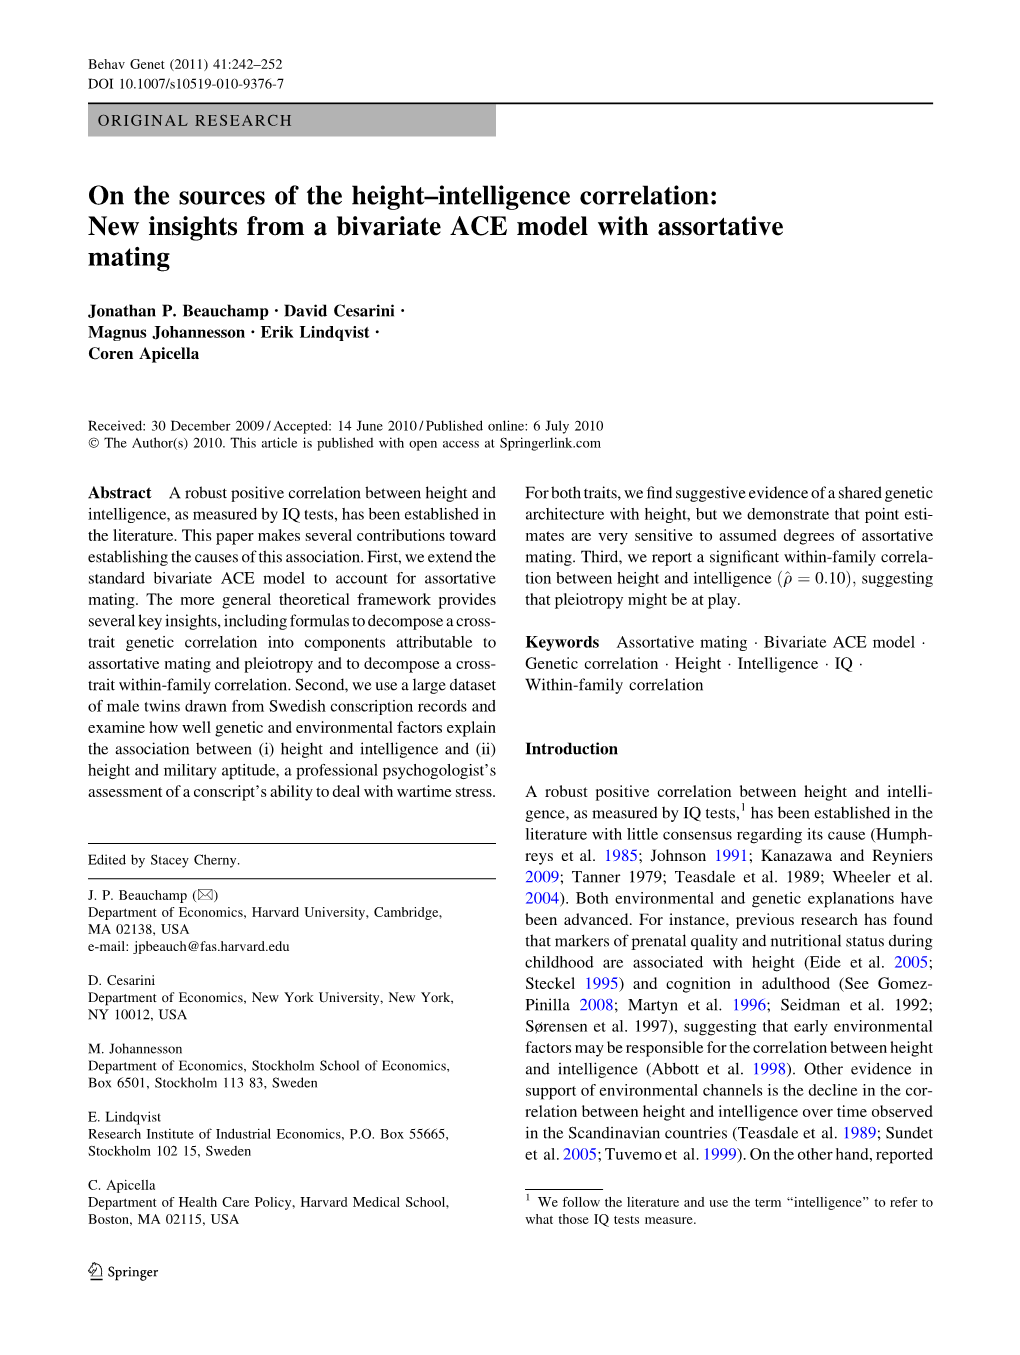 On the Sources of the Height–Intelligence Correlation: New Insights from a Bivariate ACE Model with Assortative Mating